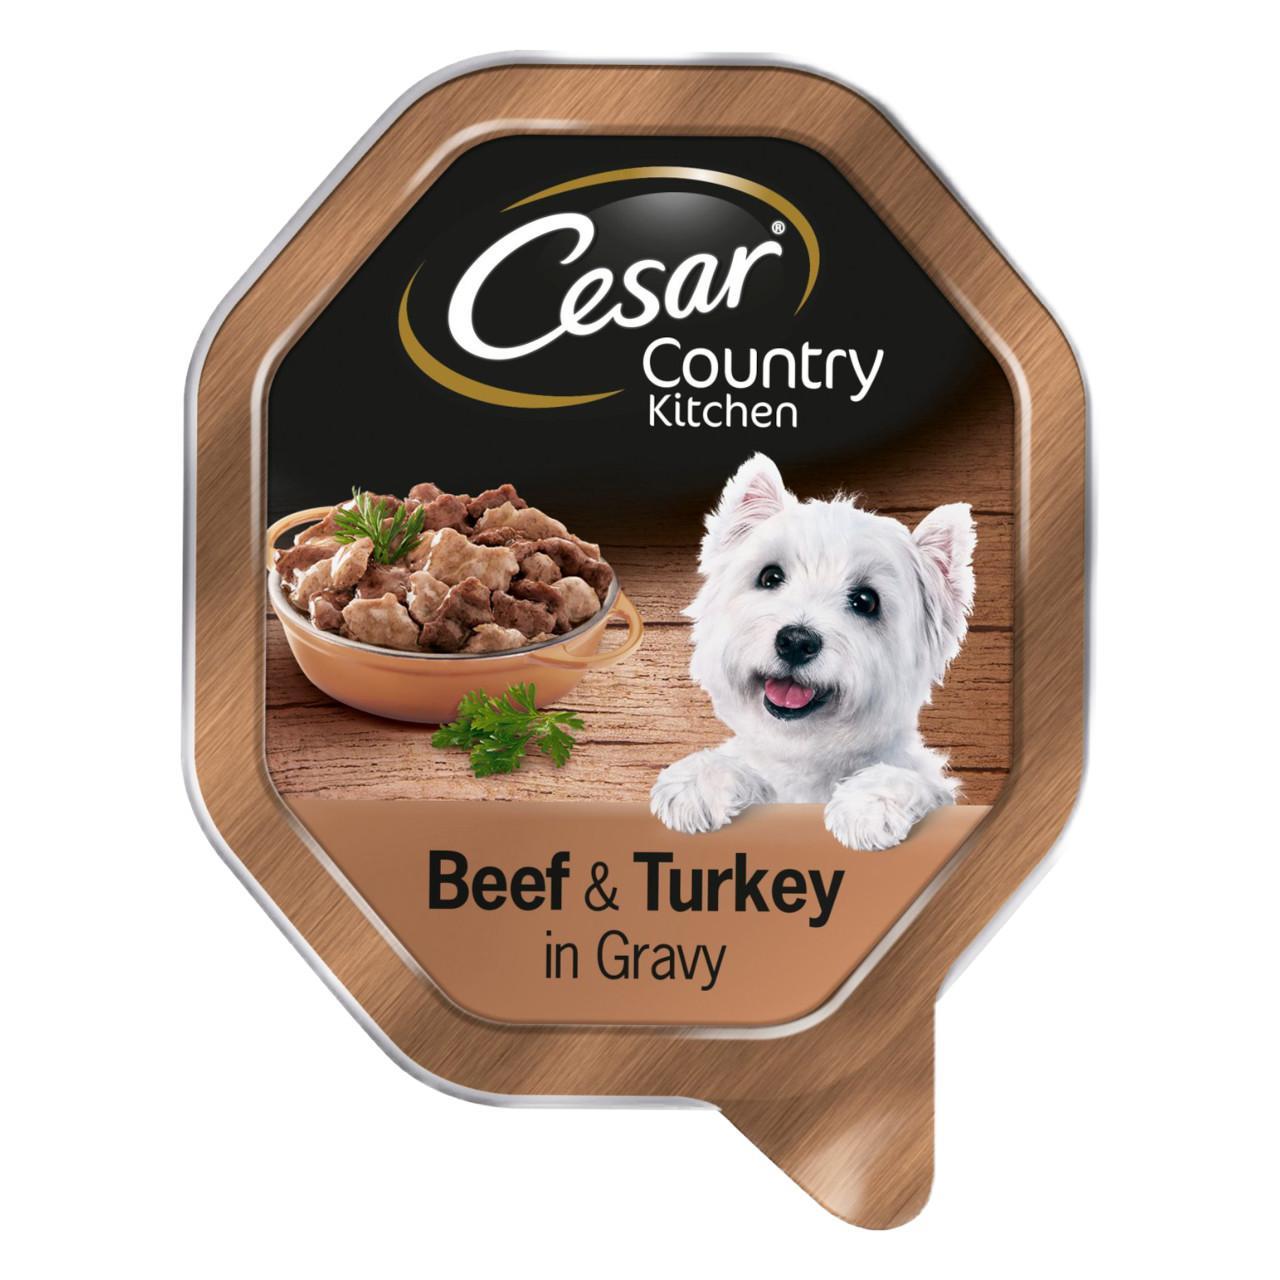 An image of Cesar Country Kitchen Meat Mix in Gravy